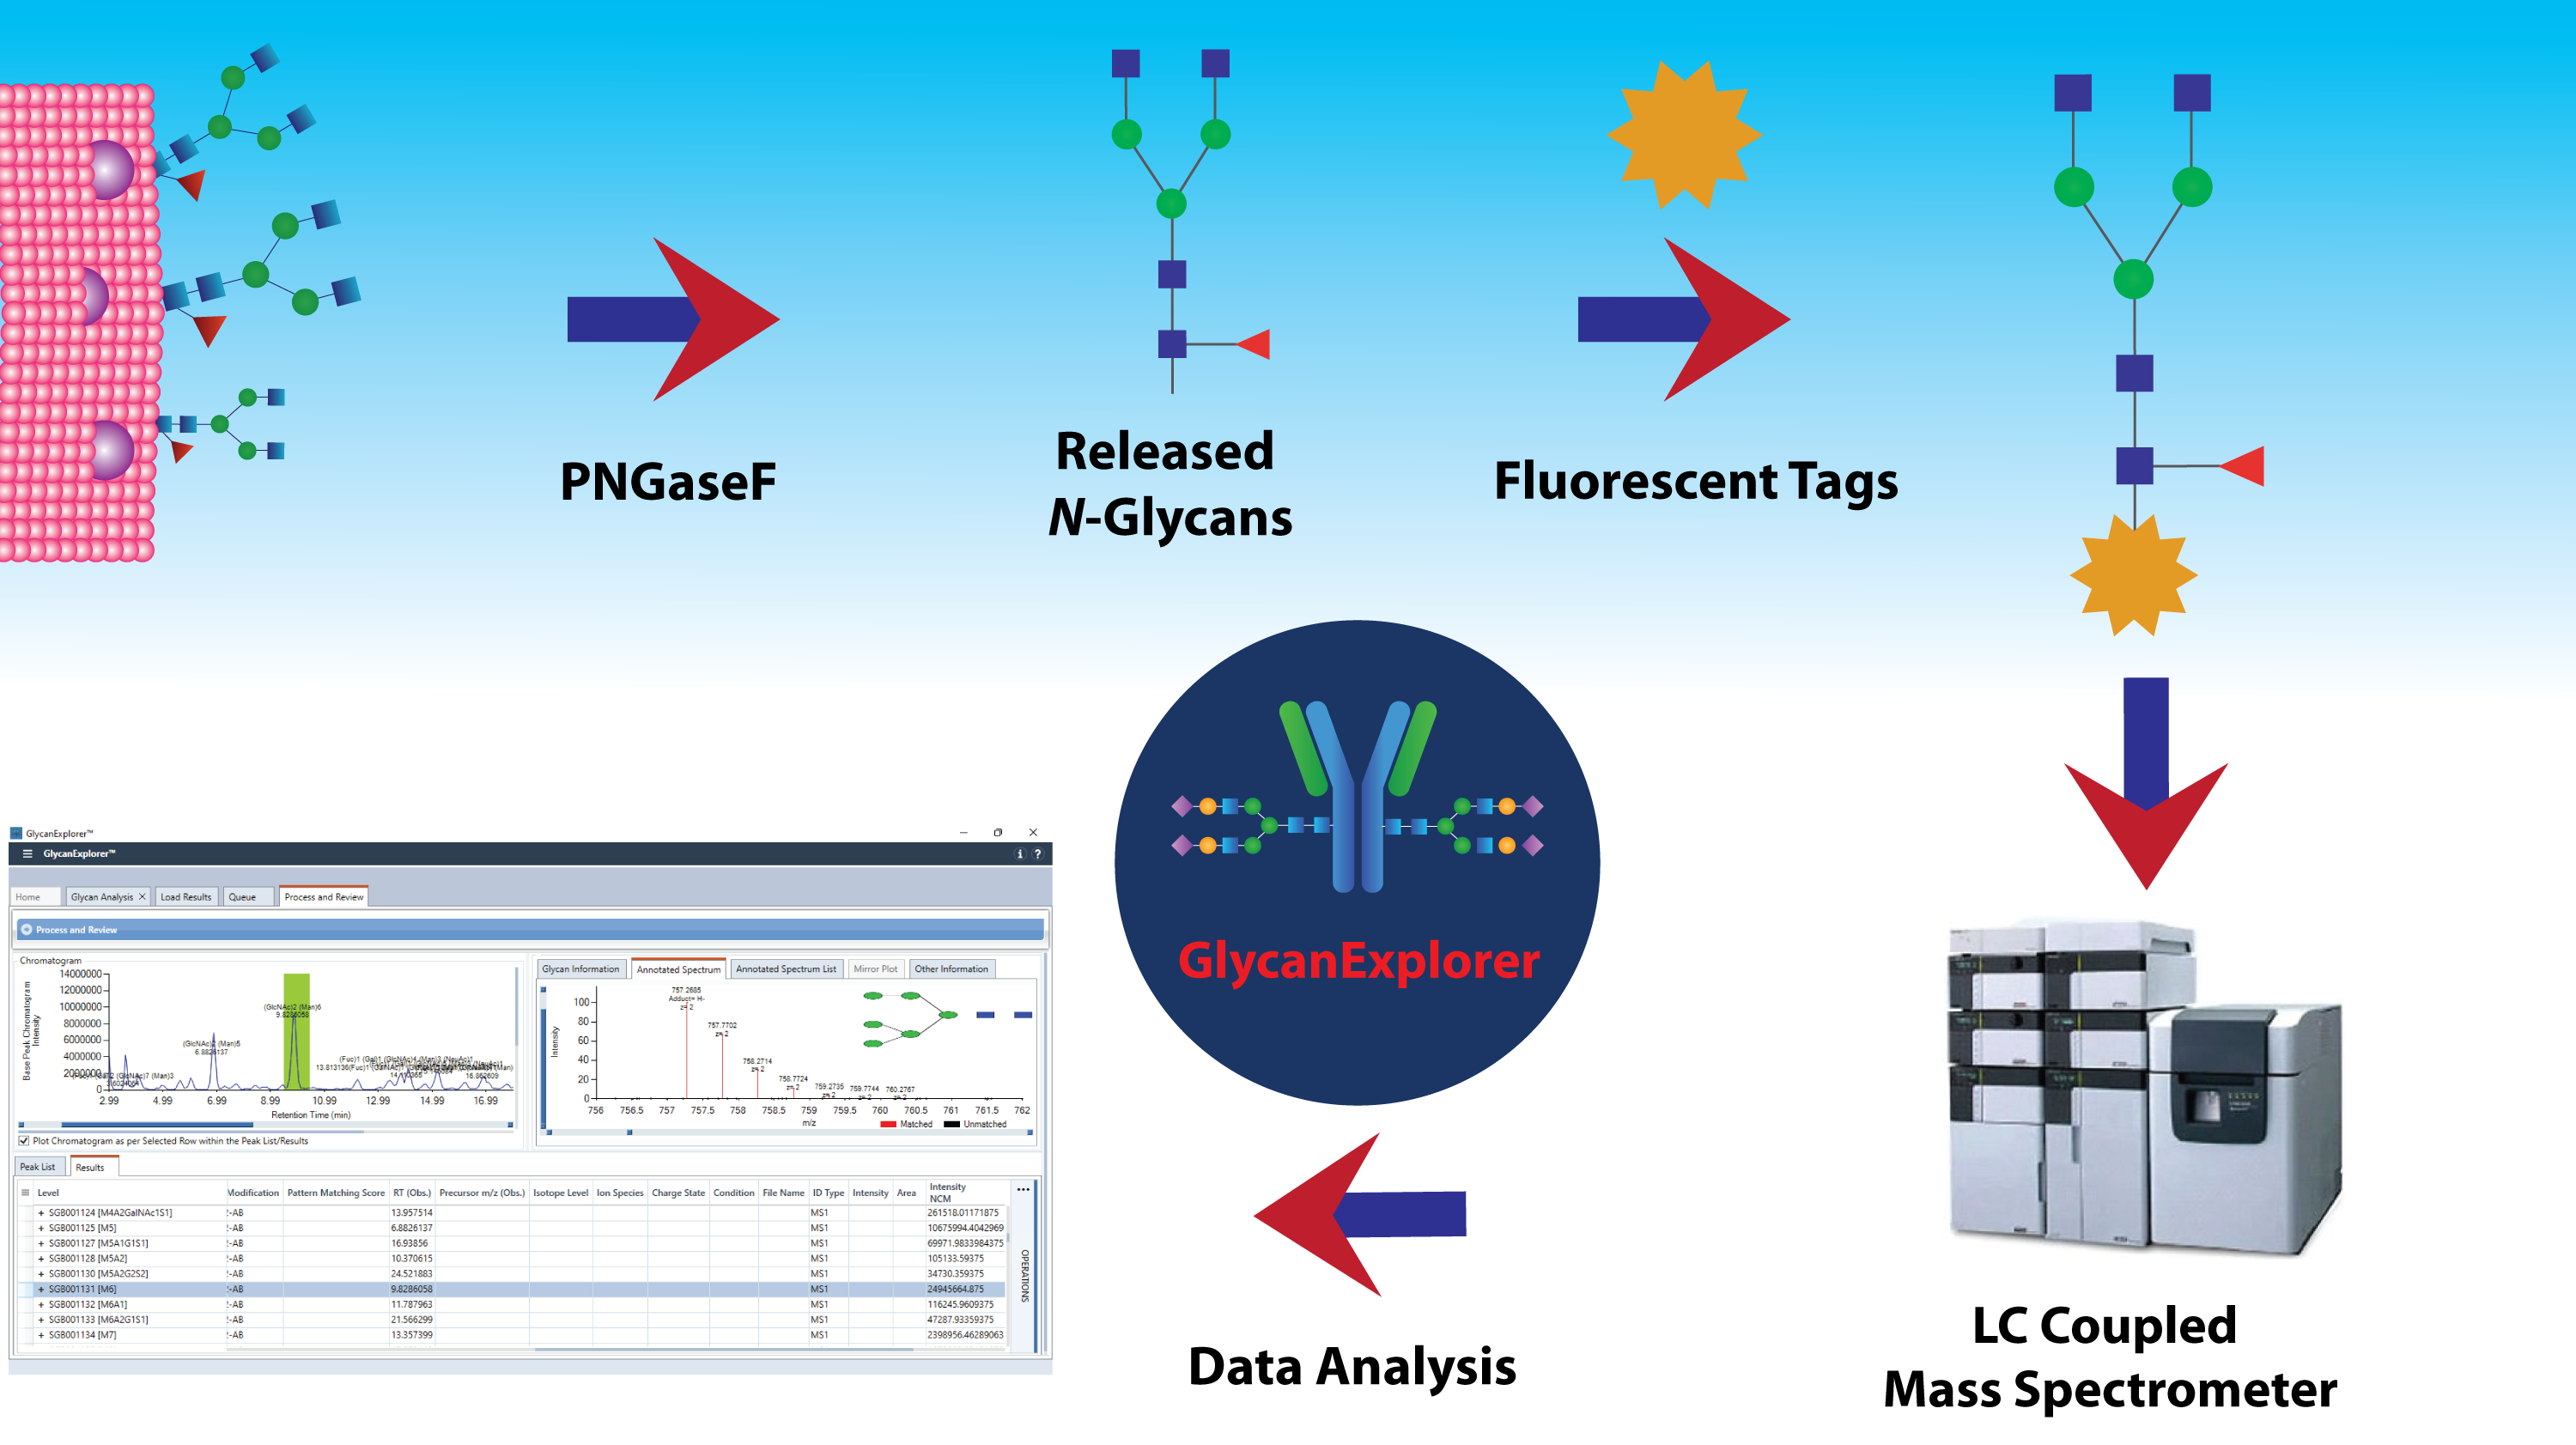 N-Glycan analysis workflow for labeled released N-Glycans